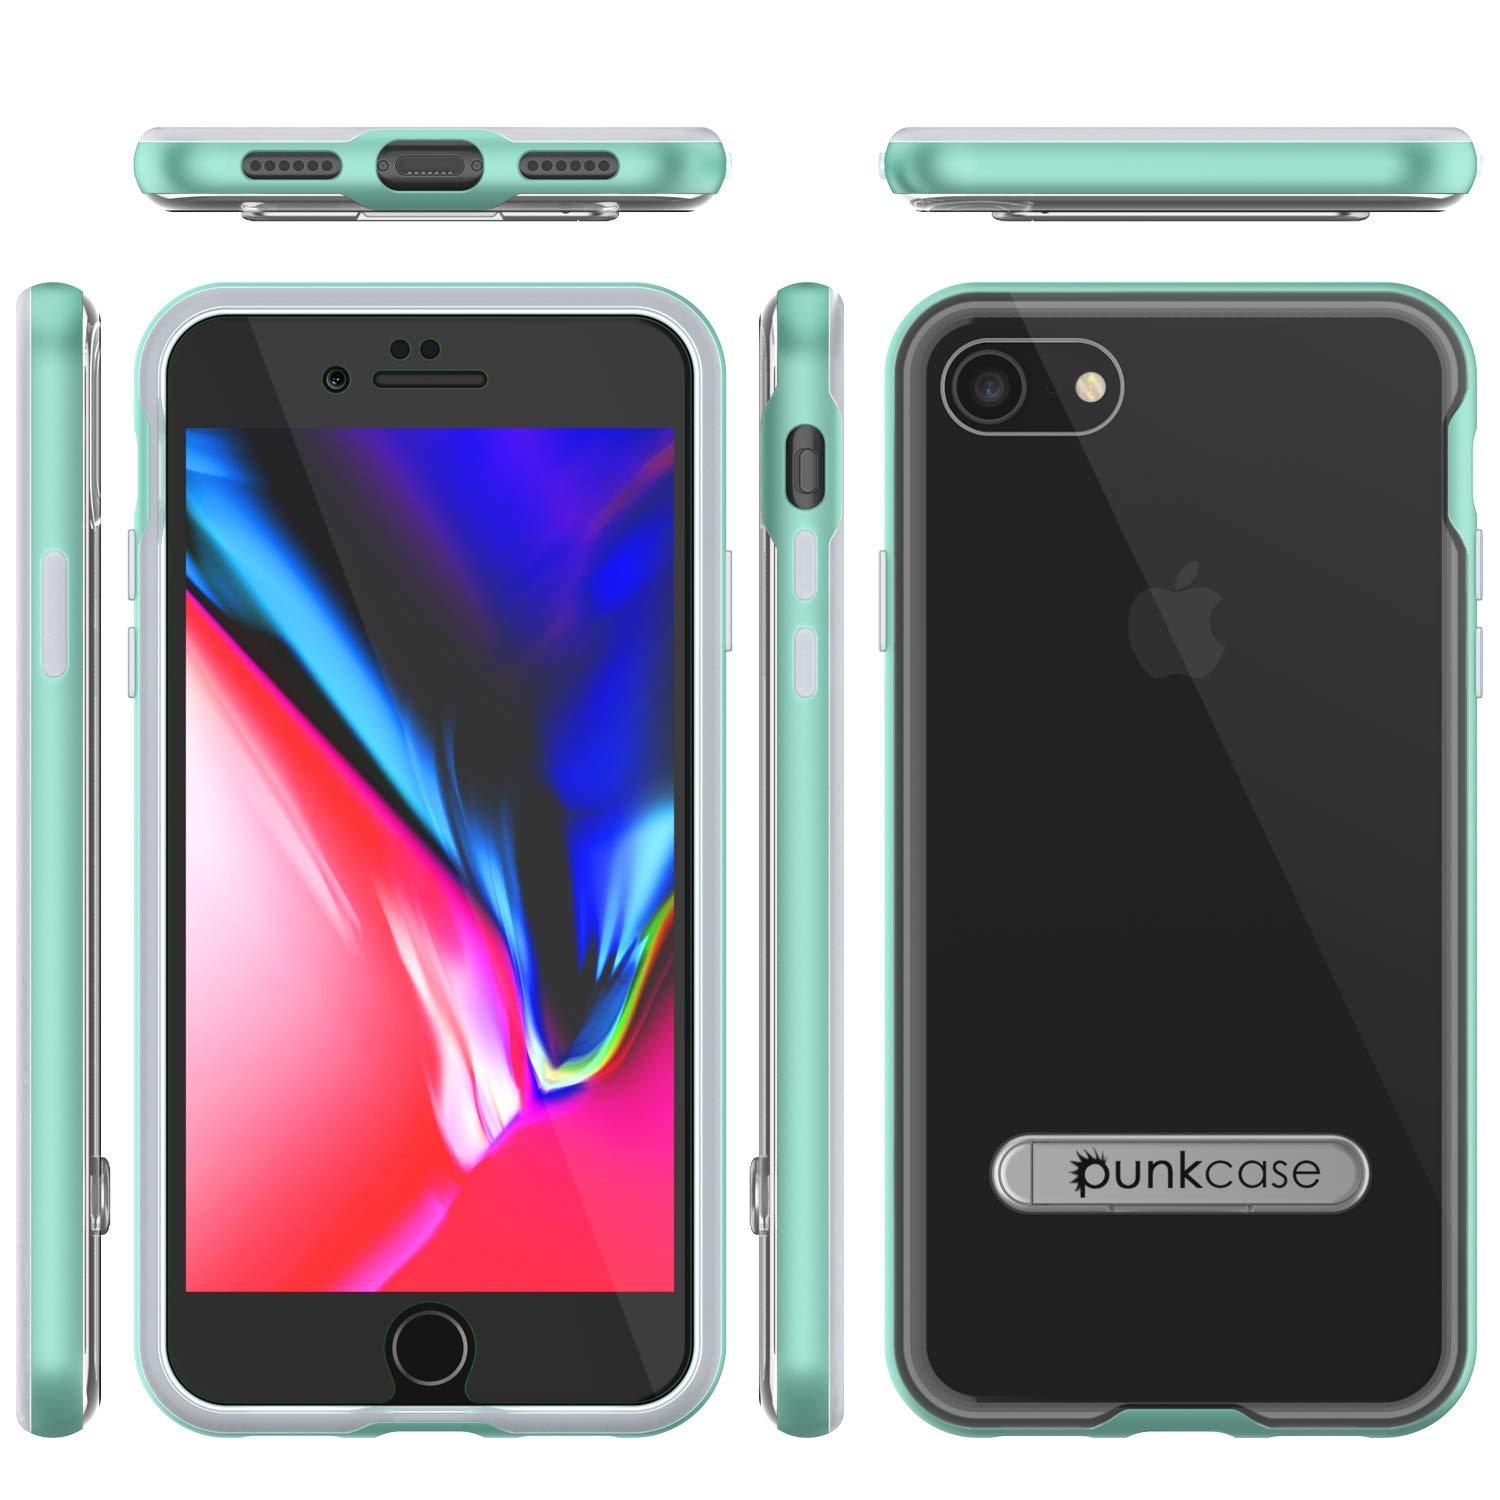 PunkCase iPhone 8 Lucid 3.0 Screen Protector W/ Anti-Shock Case [Teal]